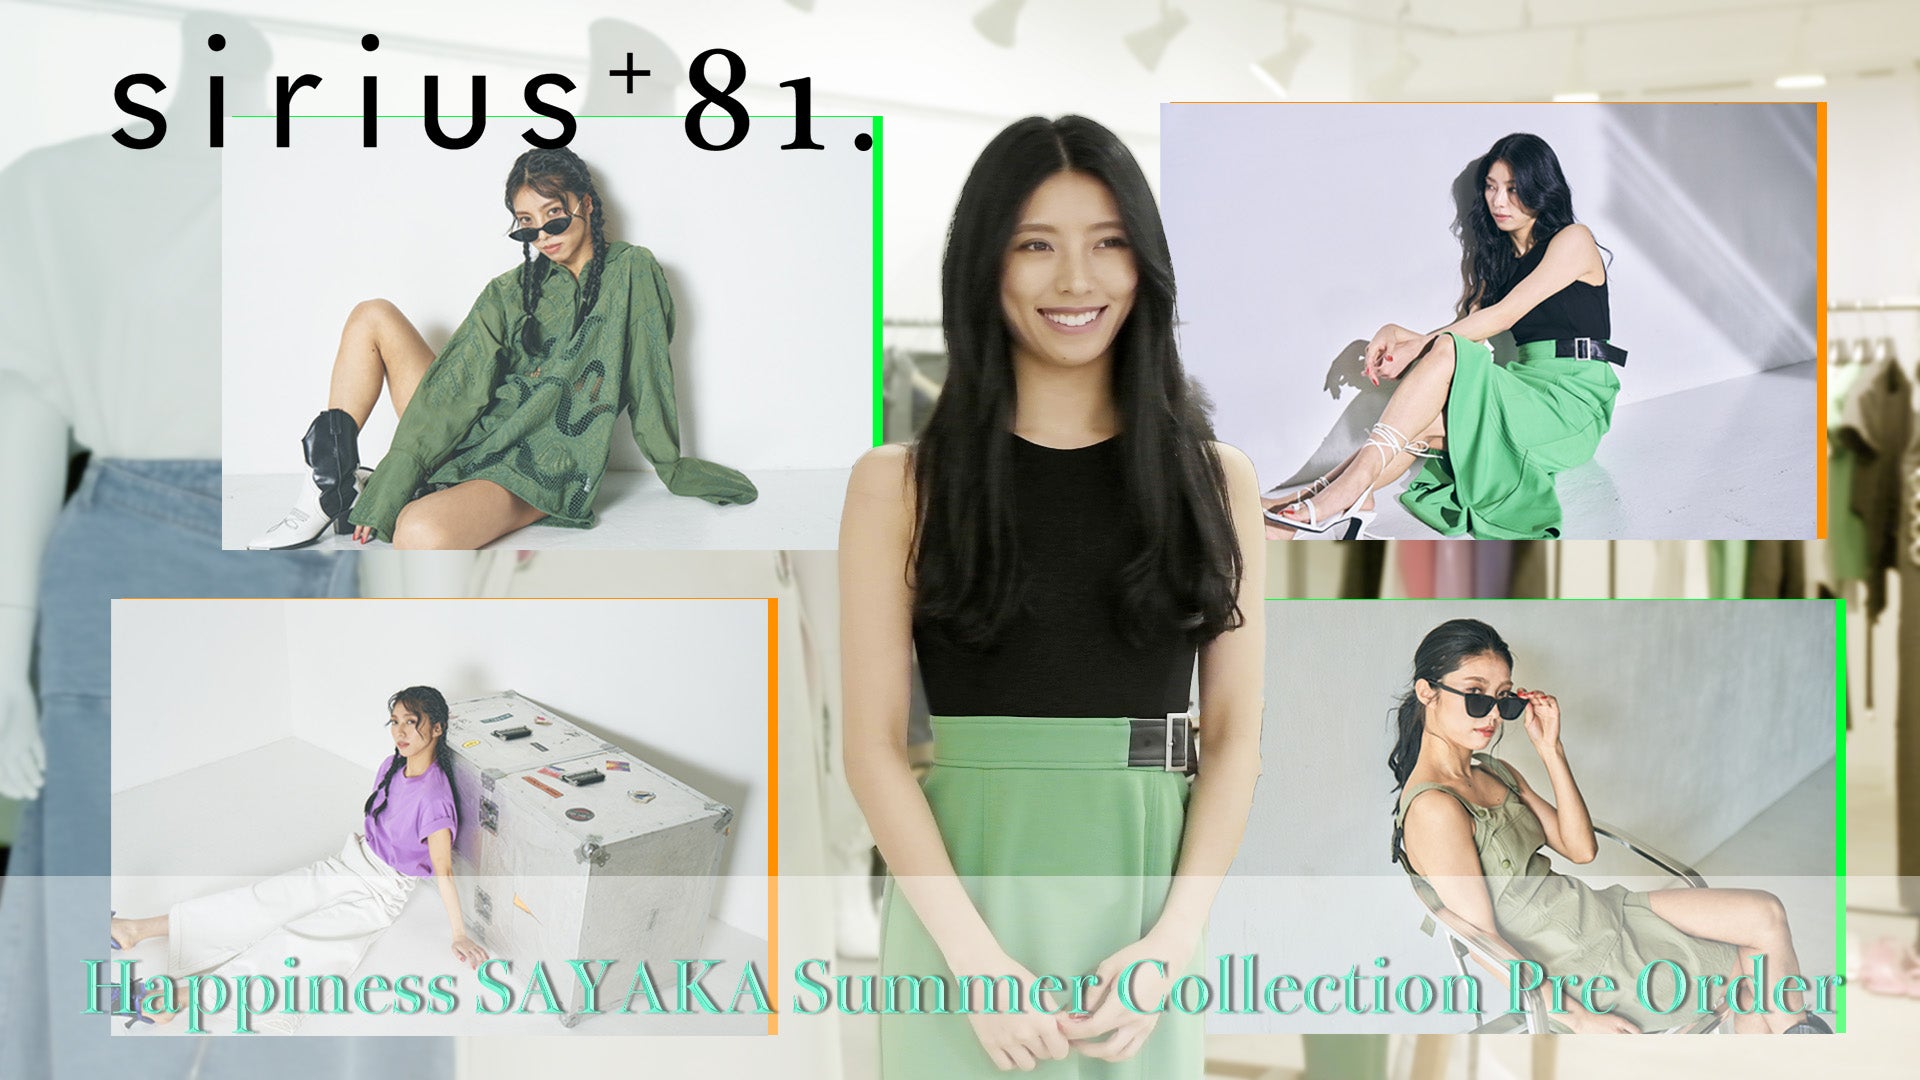 sirius+81. Summer Collection Pre Order 2022/7/3(日)Happiness